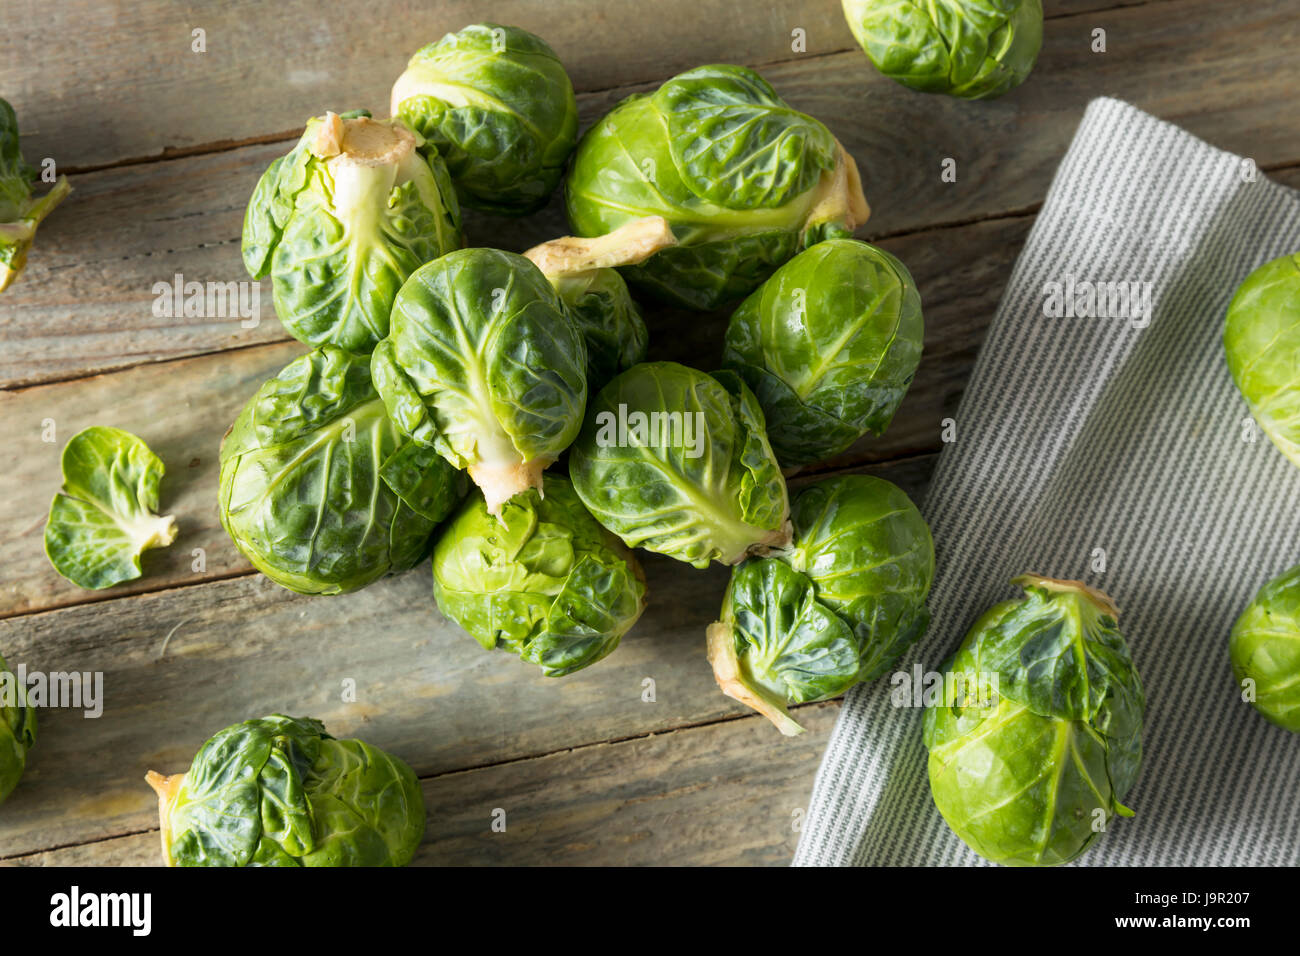 Raw Organic Green Brussel Sprouts Ready to Cook With Stock Photo